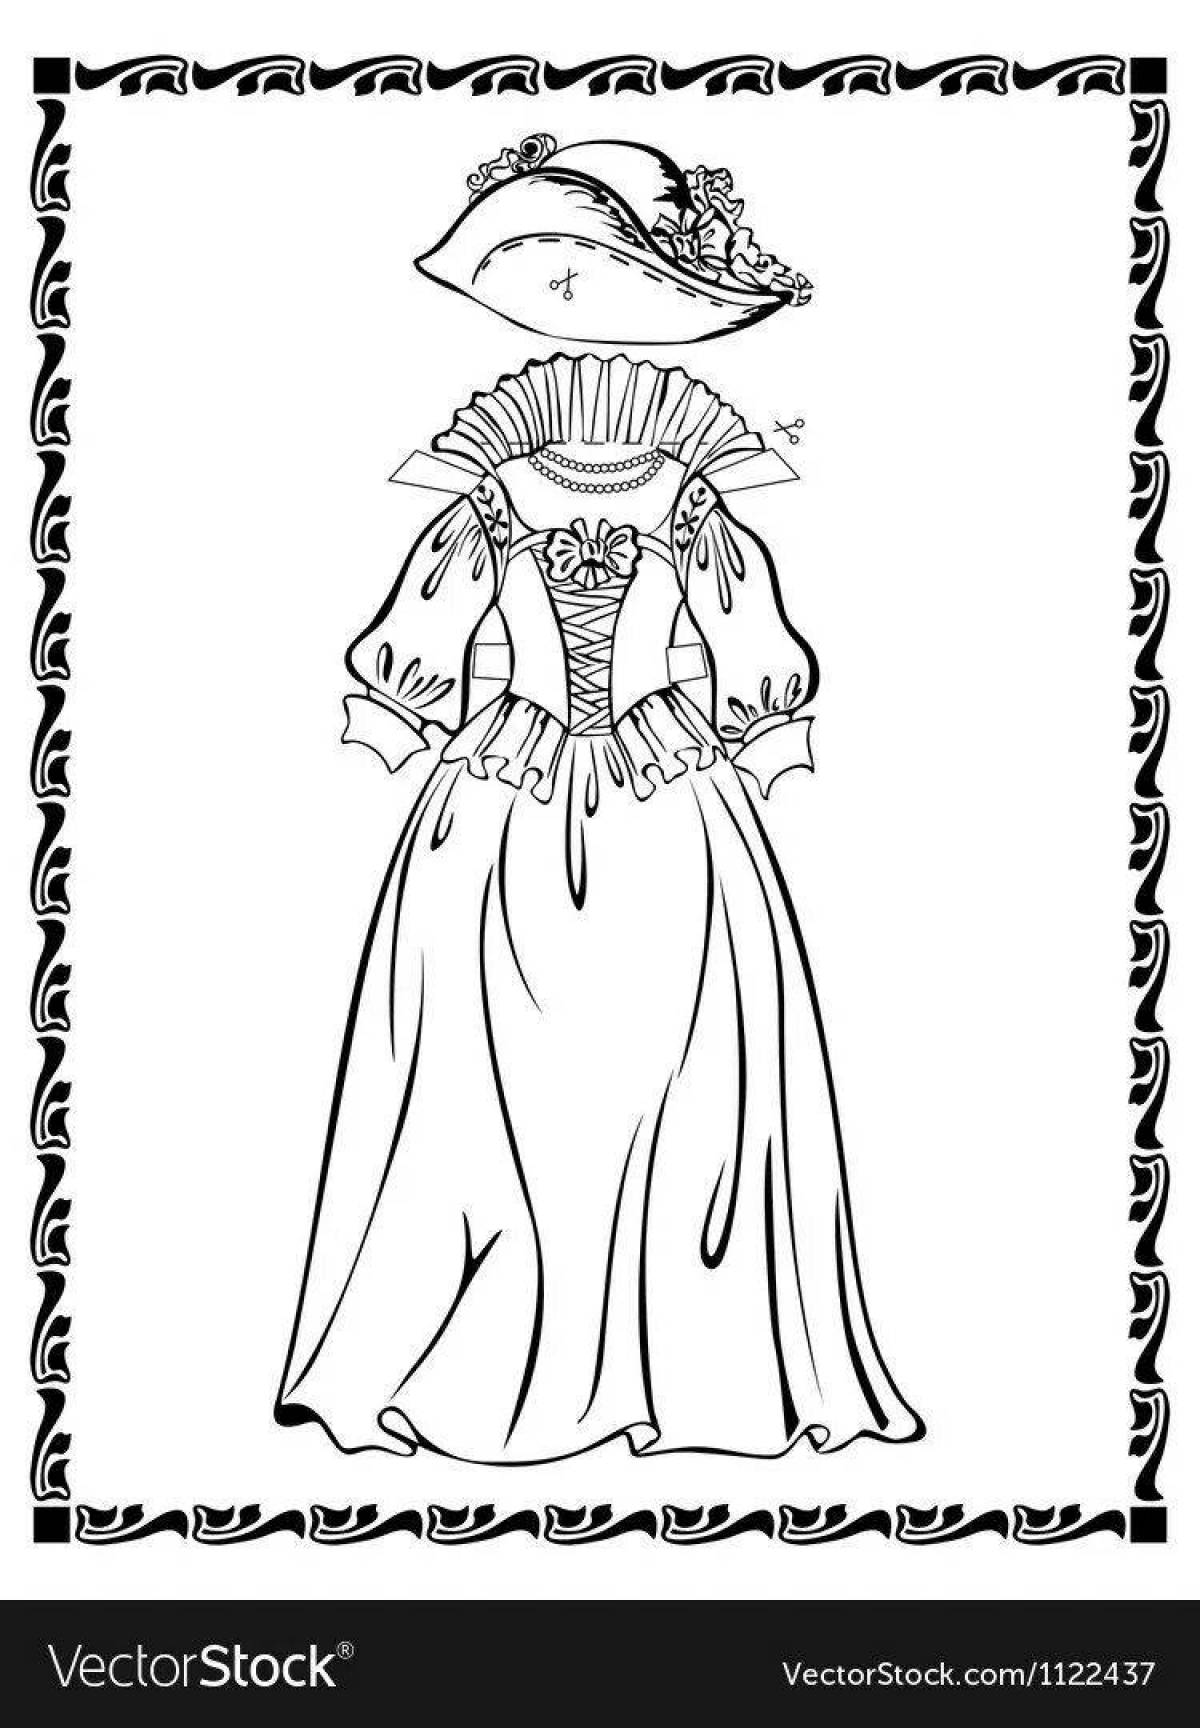 Attractive theatrical costume coloring book